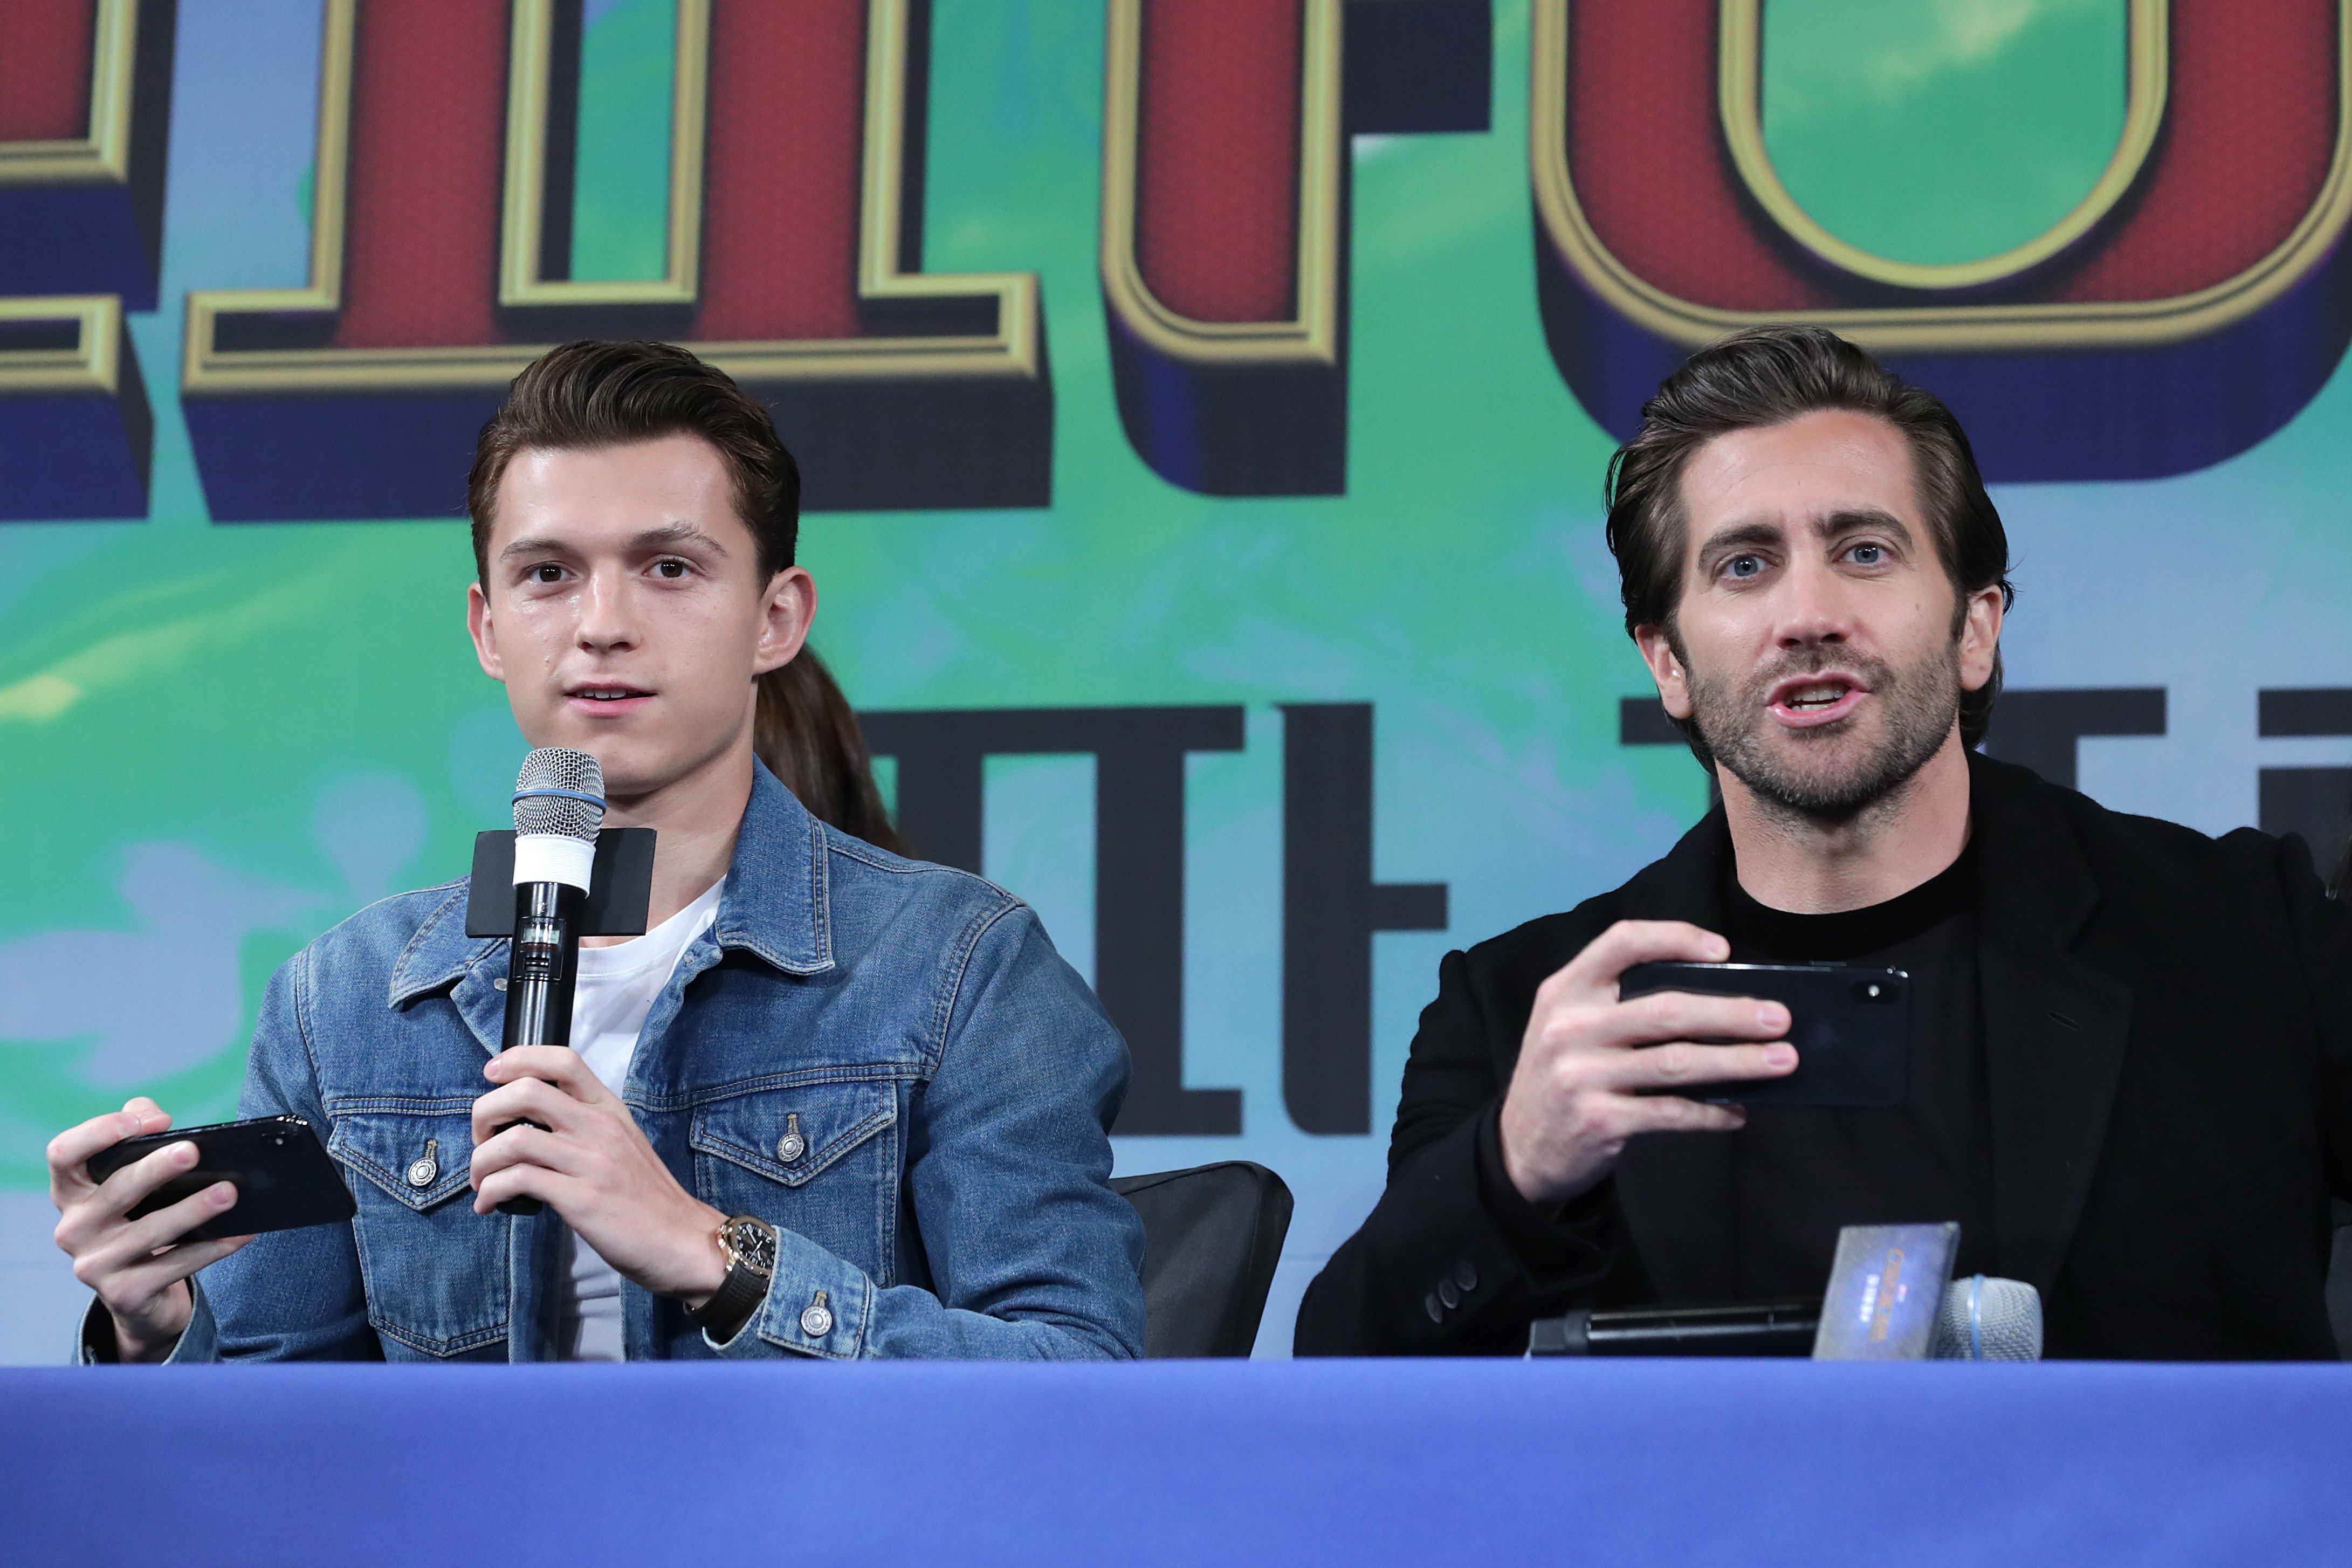 Tom Holland and Jake Gyllenhaal talking at press conference